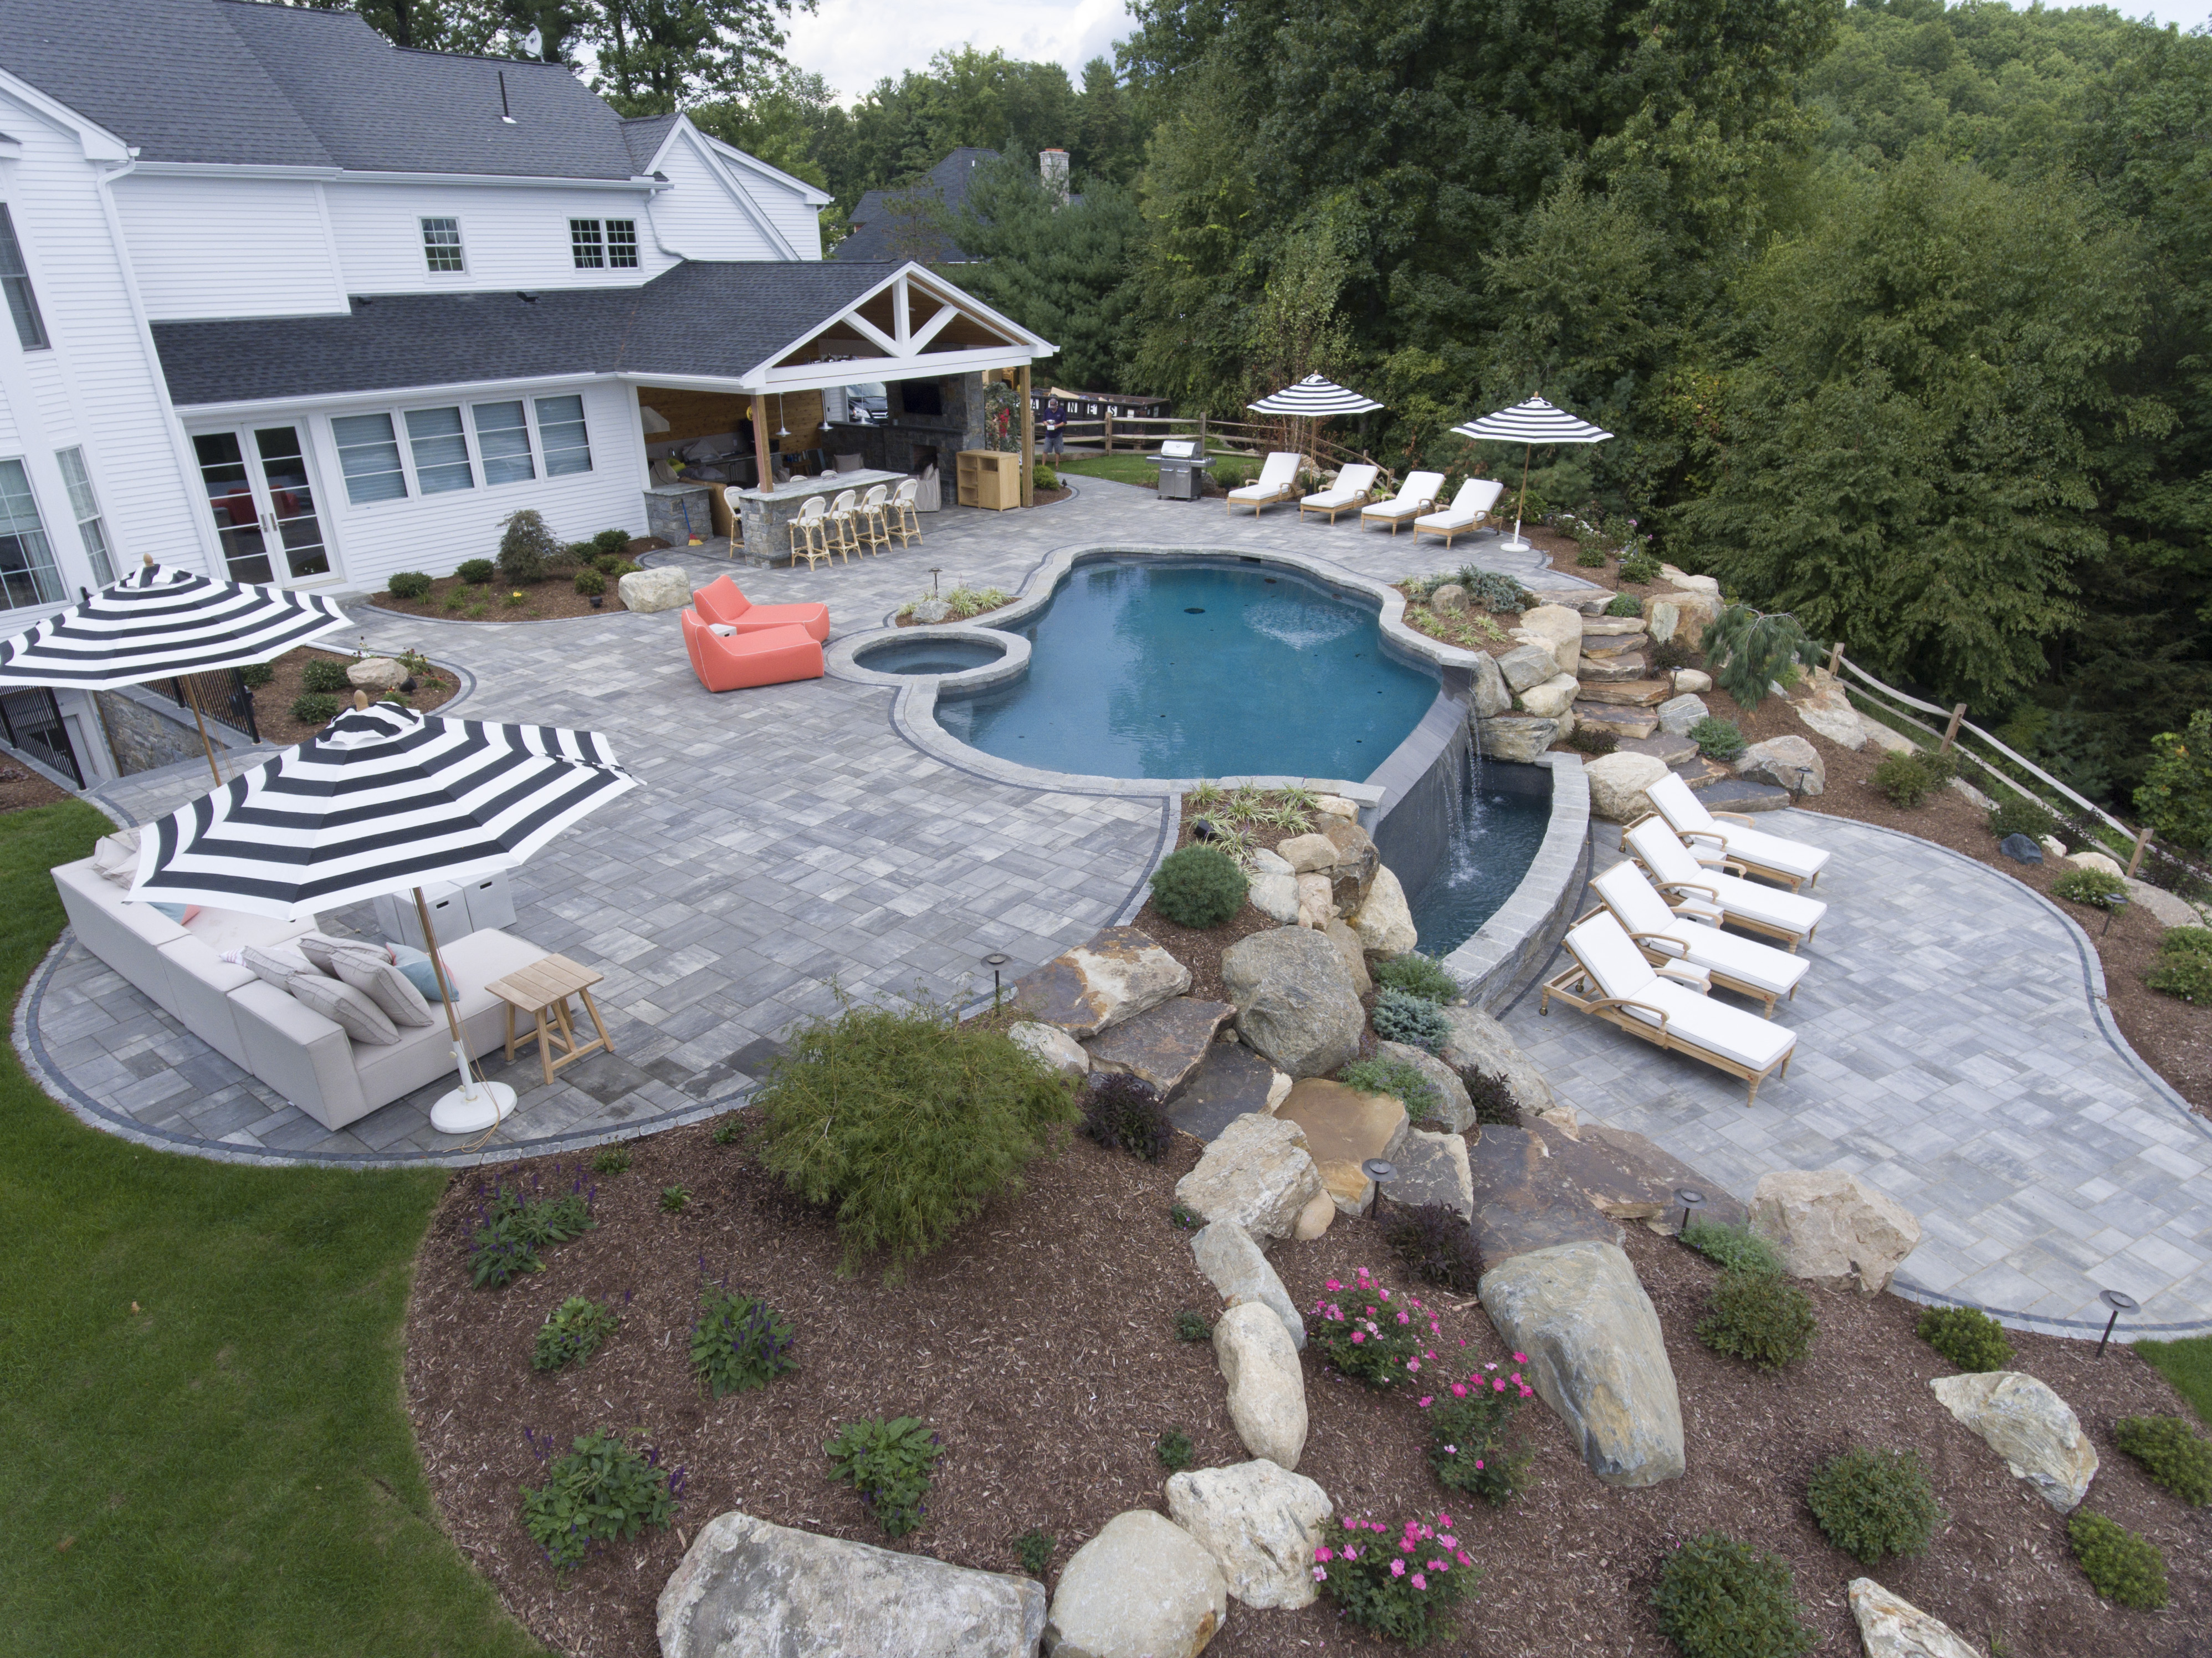 Pool Patios, Pavers, Pool Design in Long Island, NY 